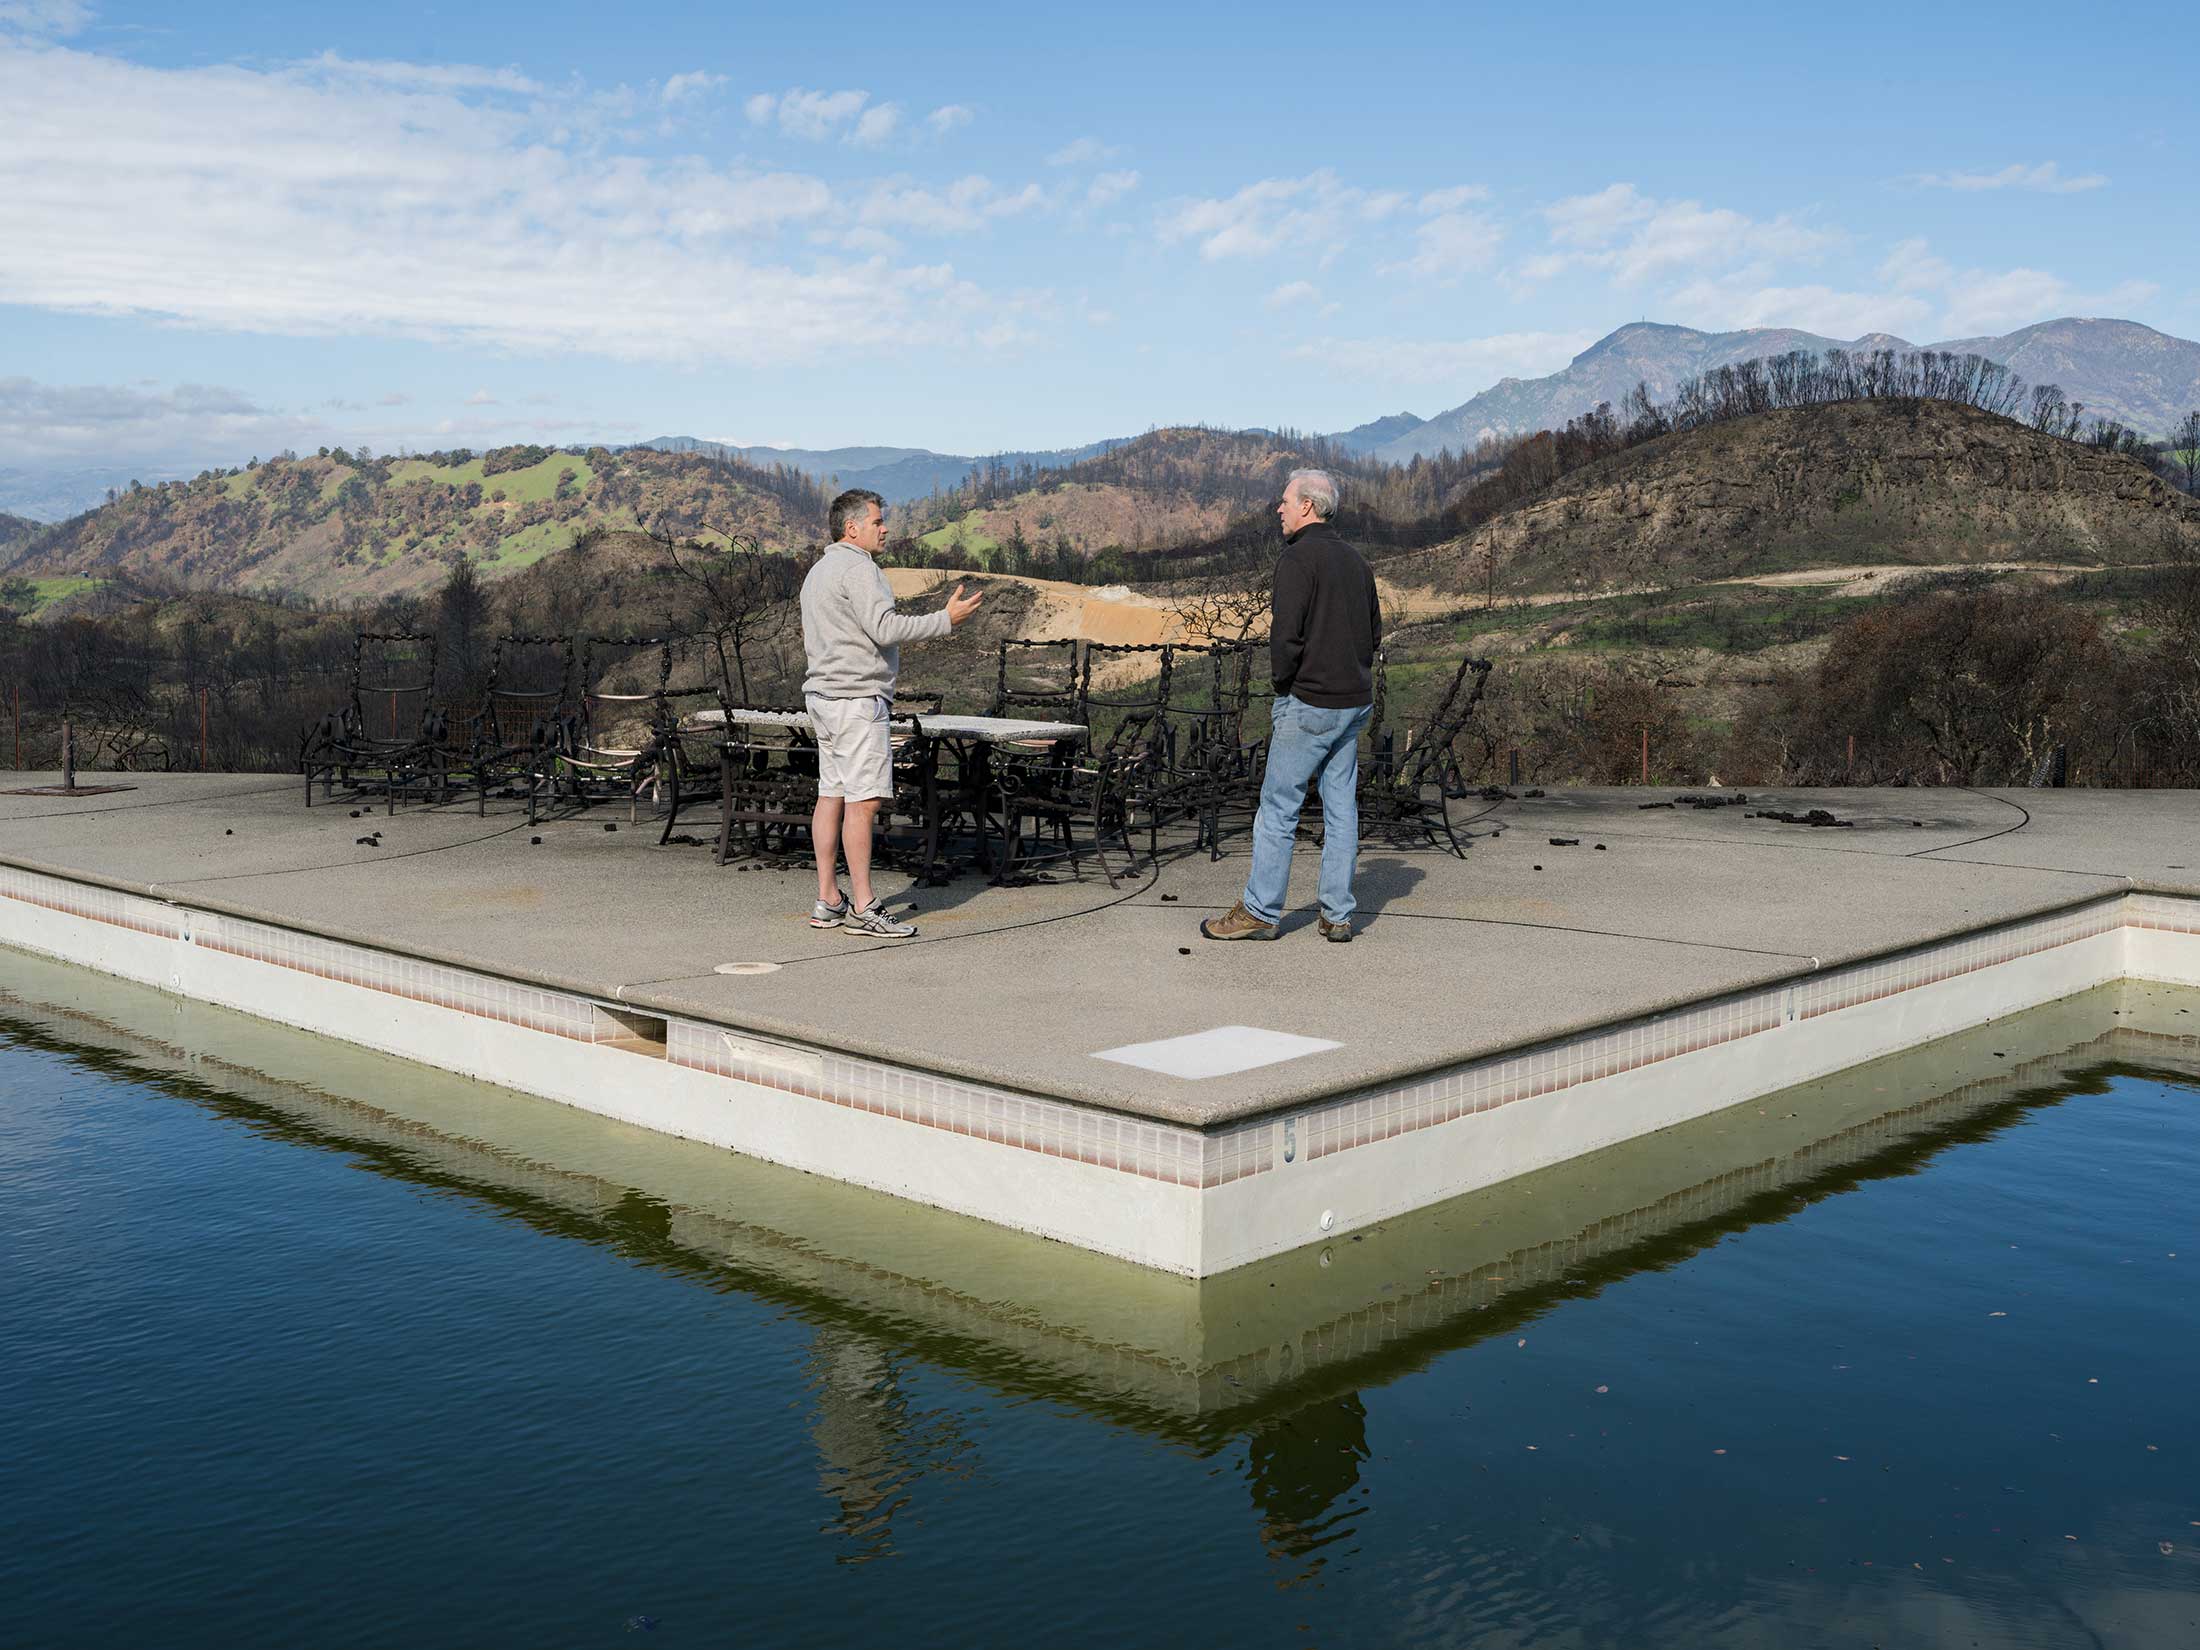 Derek Webb (left) and a potential investor discuss whether to buy the burned Mayacamas Ranch and make it a new resort. Webb was able to save his own nearby ranch.